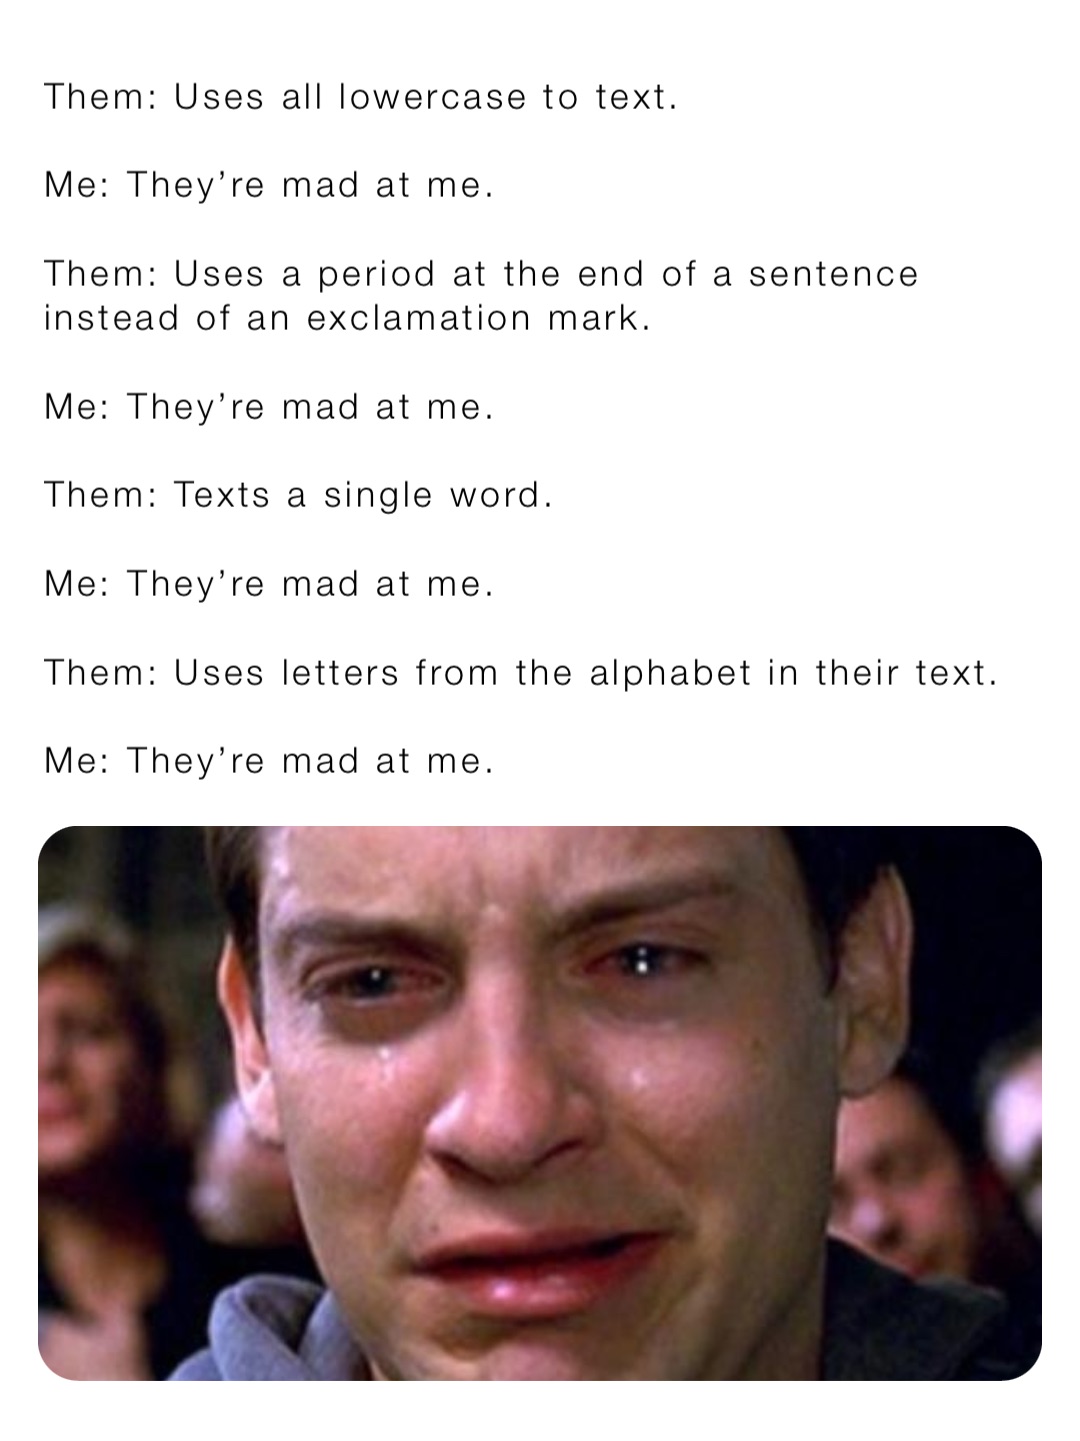 Them: Uses all lowercase to text.

Me: They’re mad at me.

Them: Uses a period at the end of a sentence instead of an exclamation mark.

Me: They’re mad at me.

Them: Texts a single word.

Me: They’re mad at me.

Them: Uses letters from the alphabet in their text.

Me: They’re mad at me.